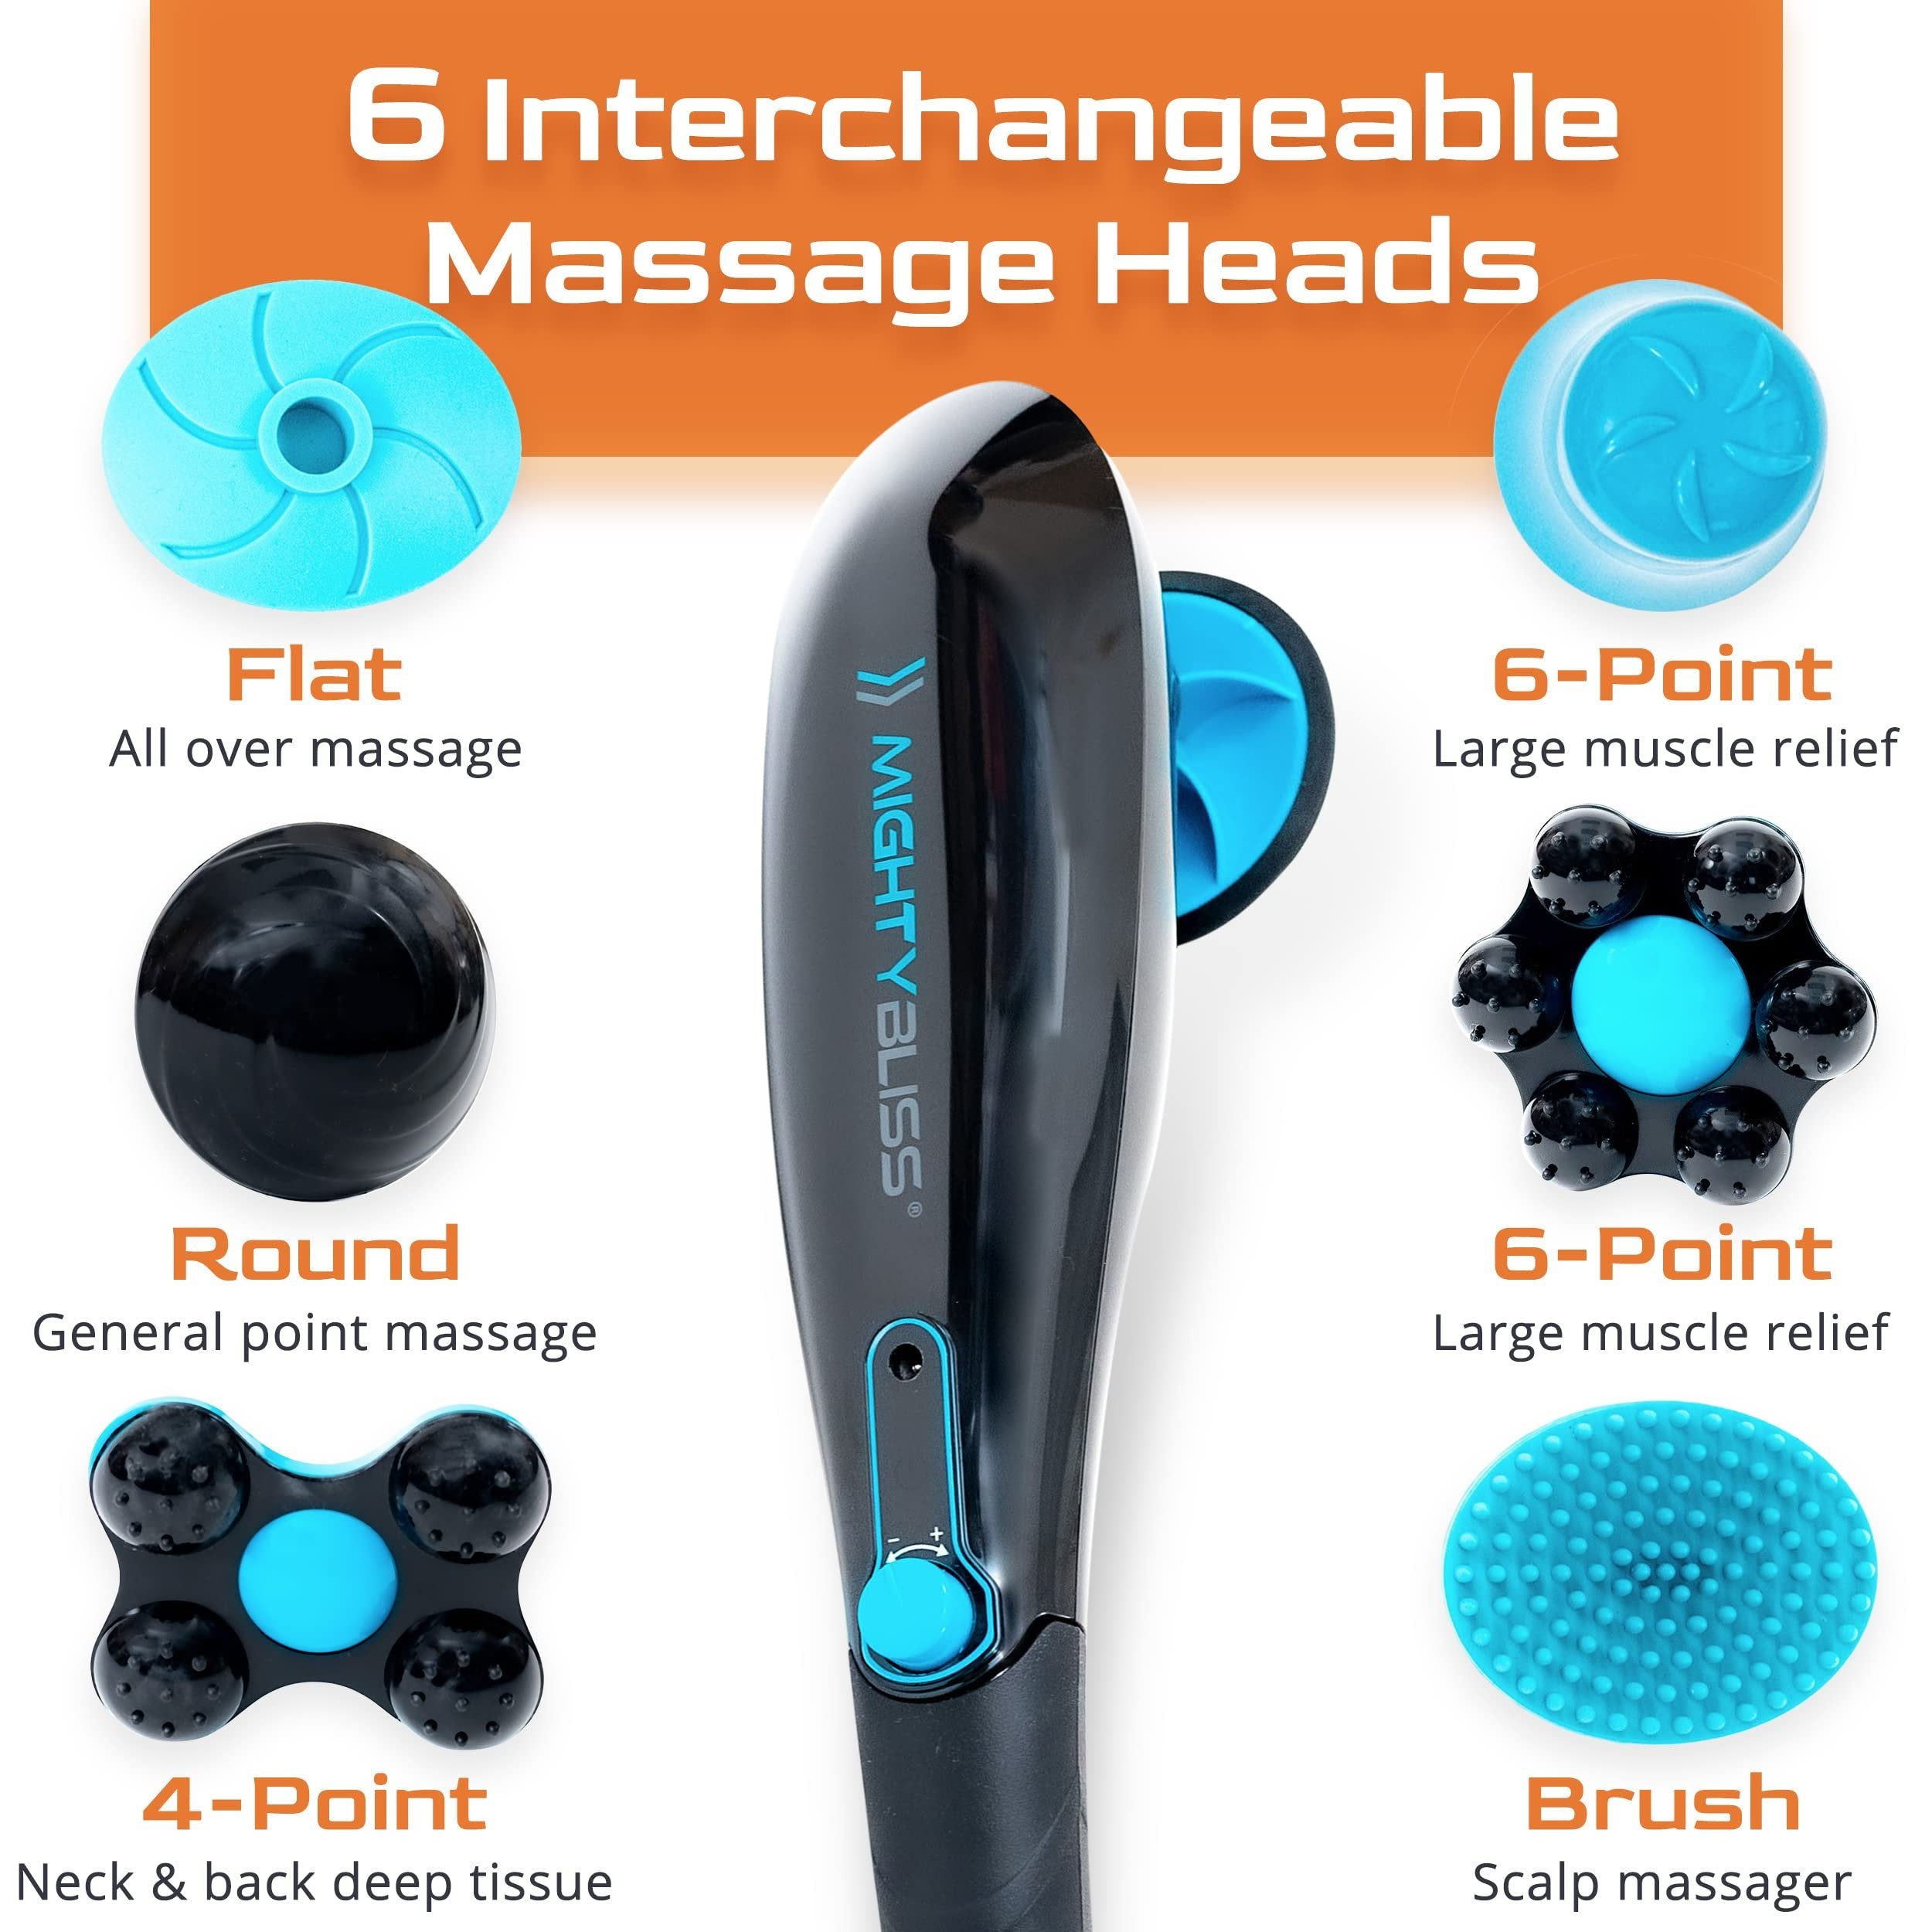 MIGHTY BLISS Cordless Handheld Deep Tissue Massager - Full Body Relief Therapy Machine, Blue, Size 1